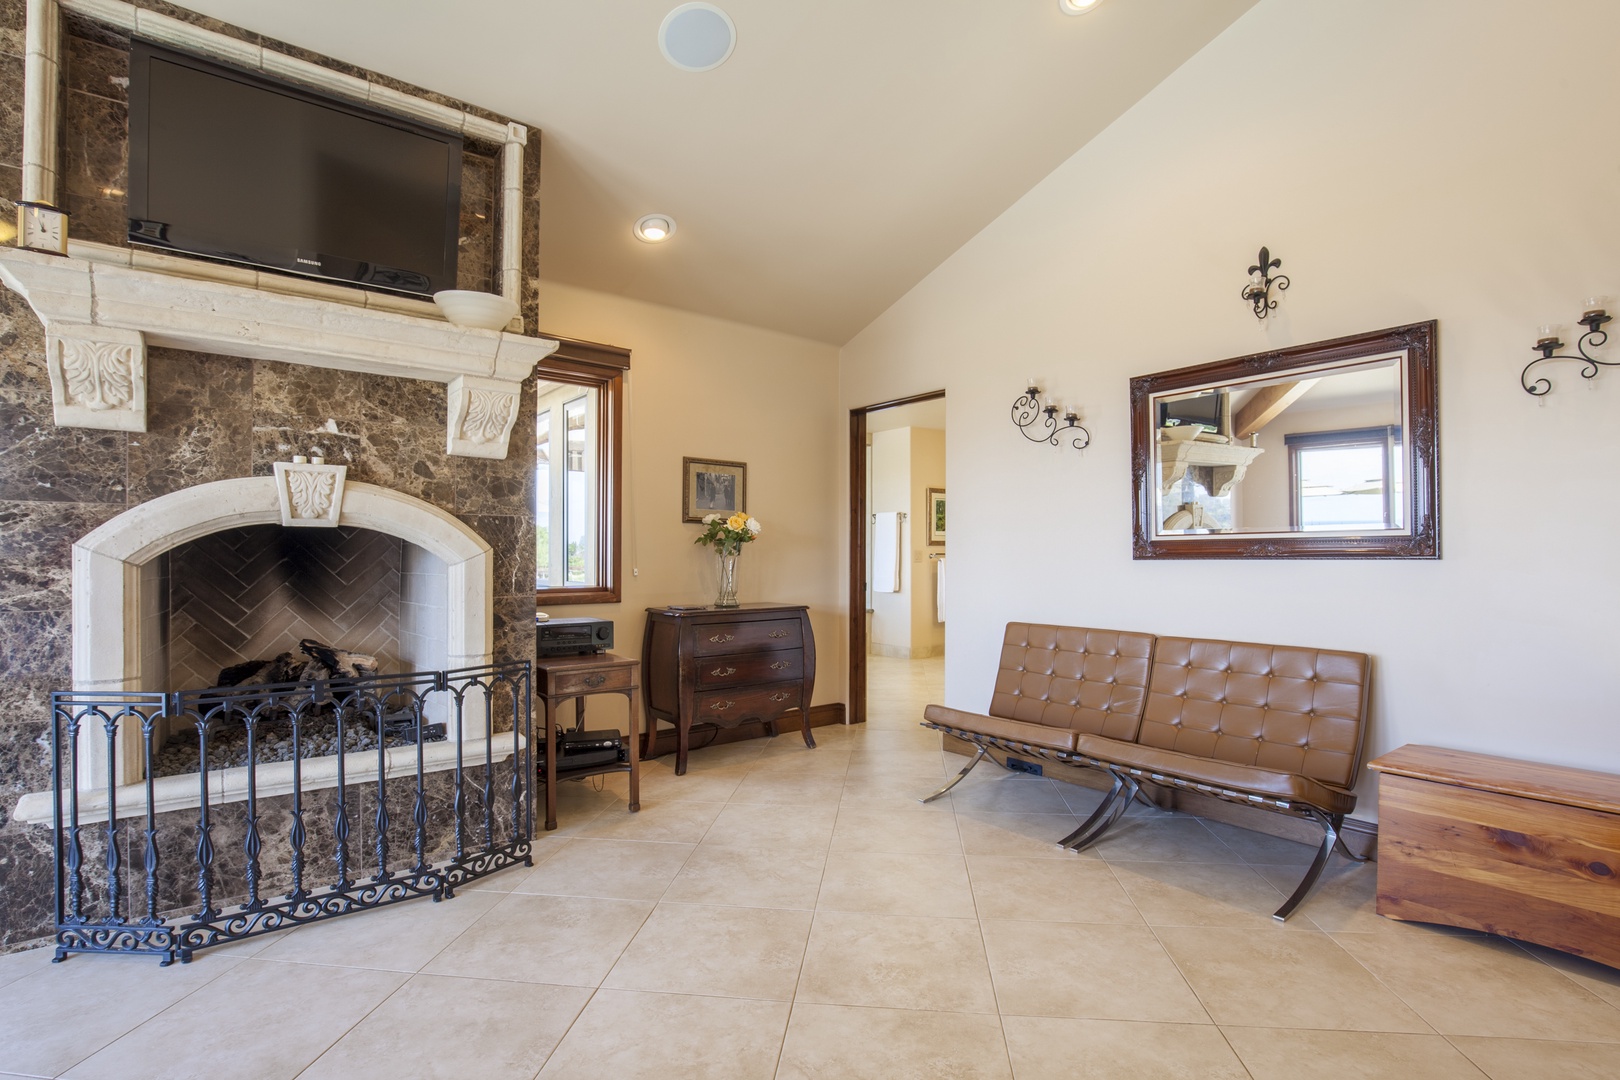 La Jolla Vacation Rentals, Jewel Above La Jolla Shores - Detailed fireplace and large TV with seating area